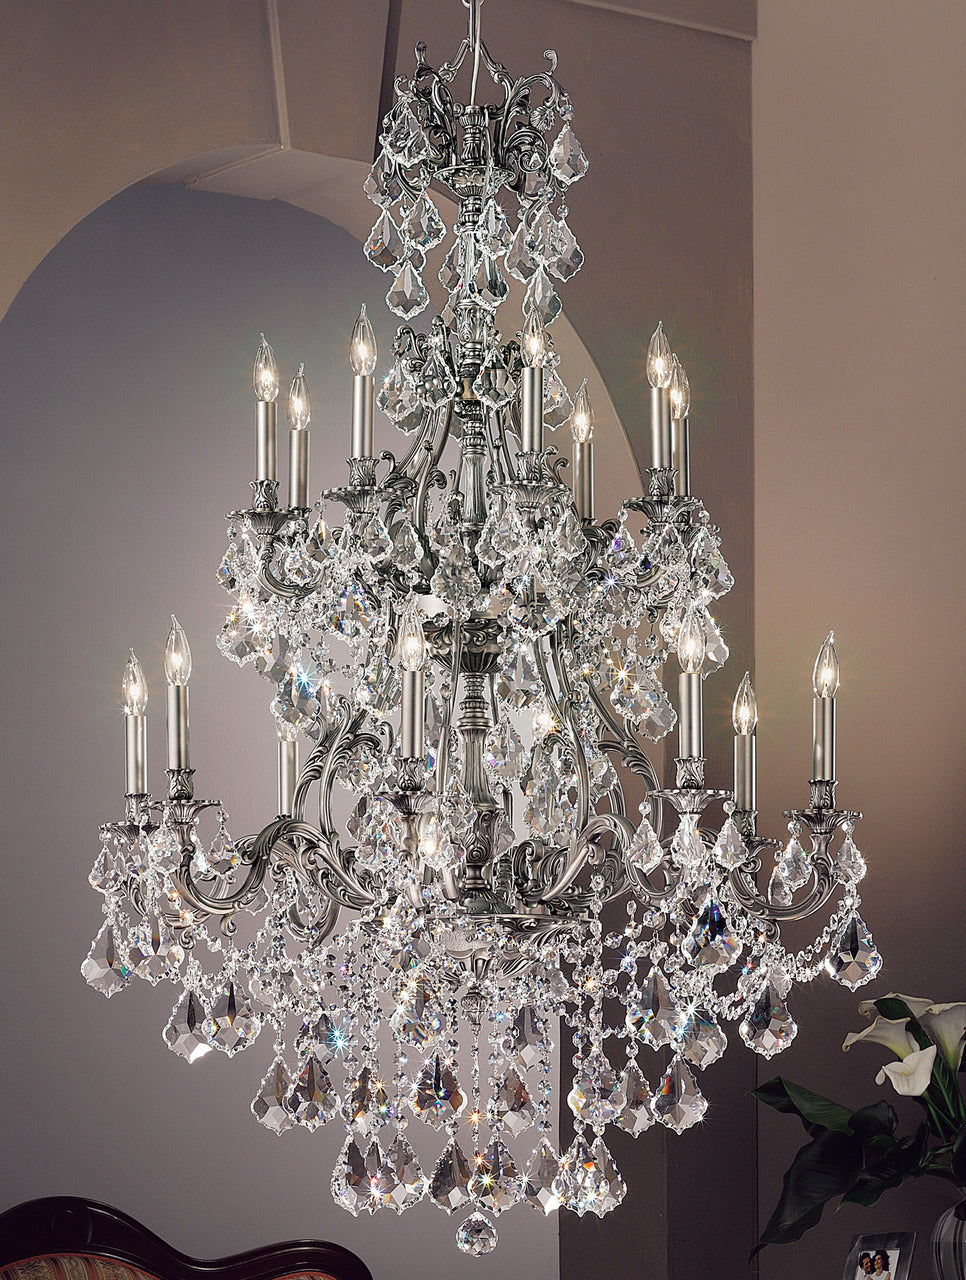 Classic Lighting 57357 FG CGT Majestic Imperial Crystal Chandelier in French Gold (Imported from Spain)